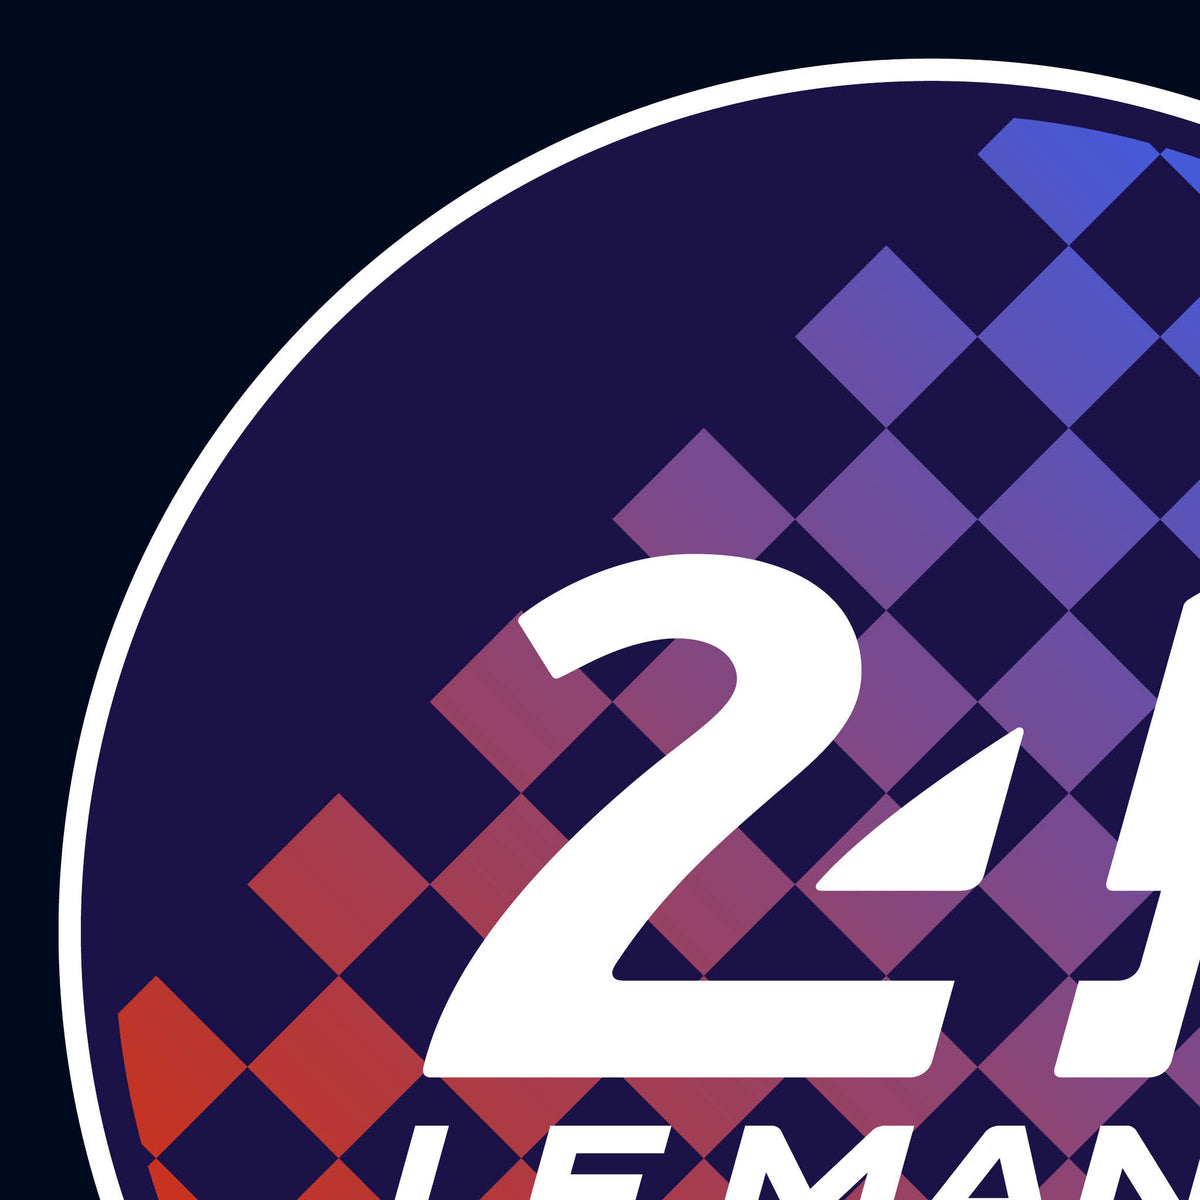 Official Le Mans Chequered Flag Roundel Sticker